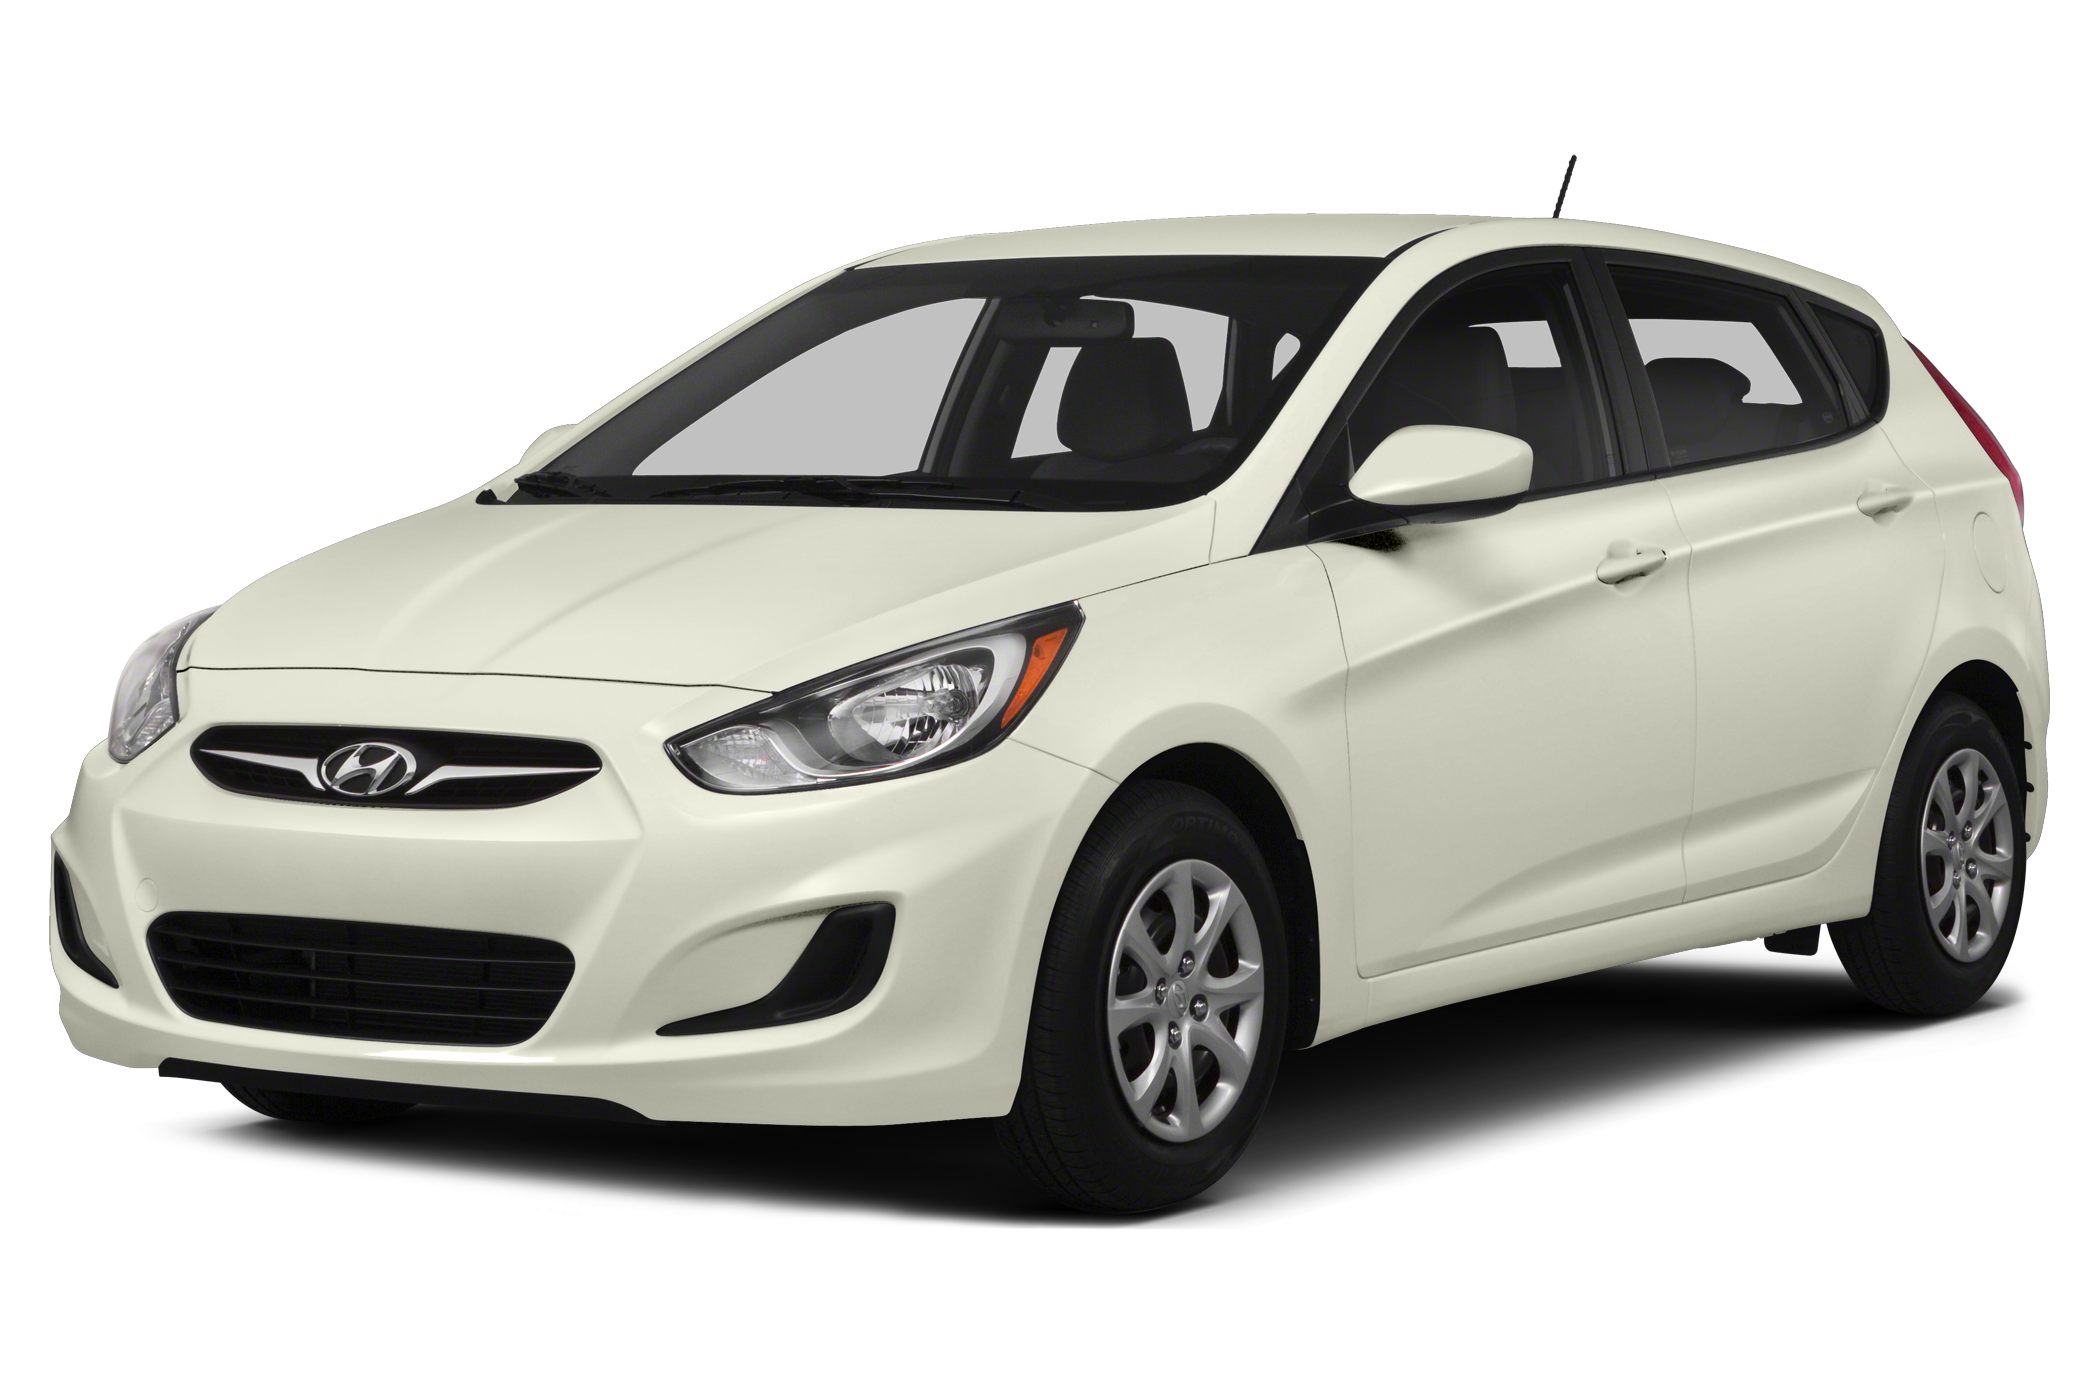 2014 Hyundai Accent oem parts and accessories on sale